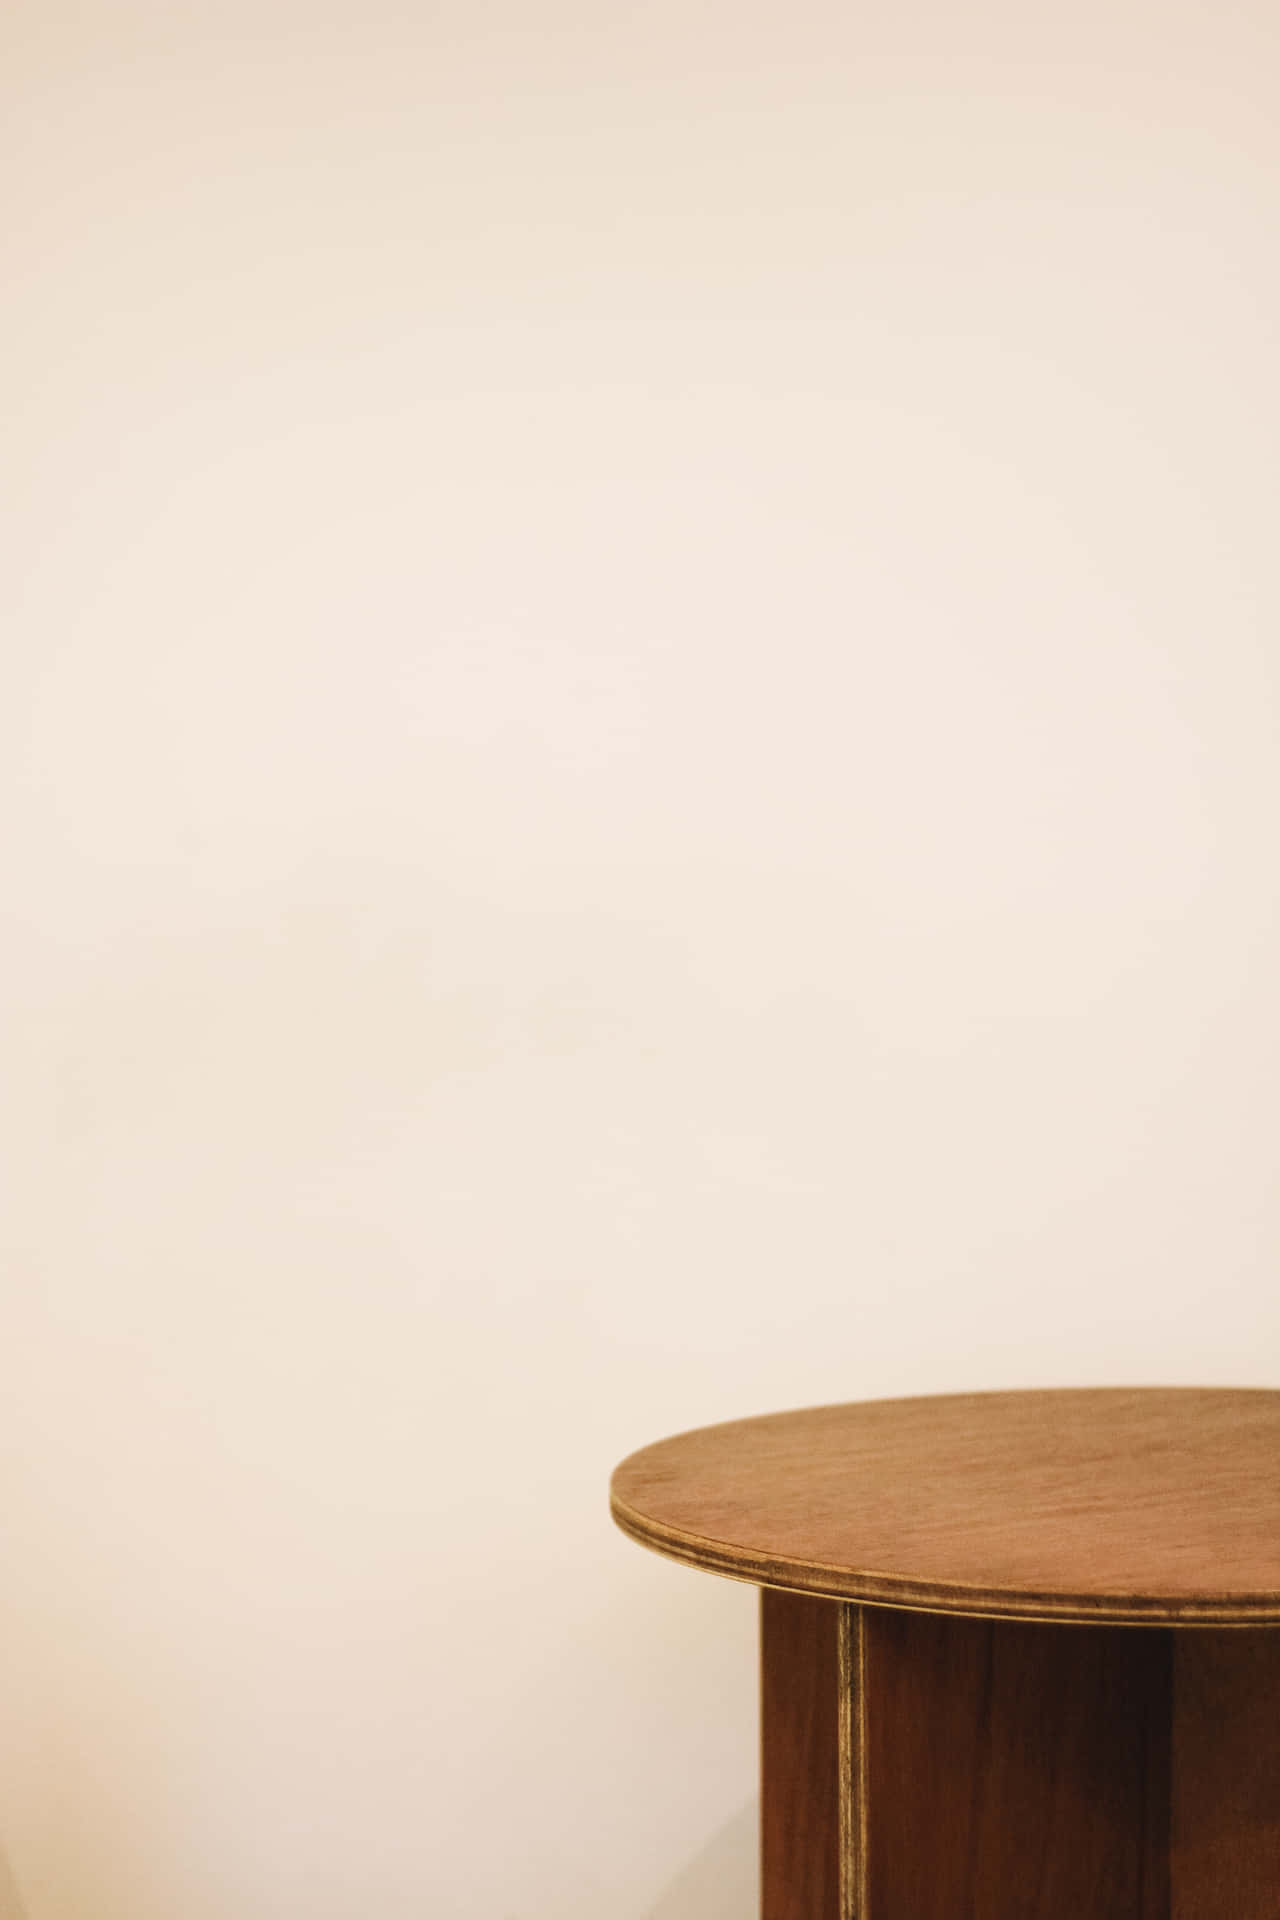 Round Wooden Table Background